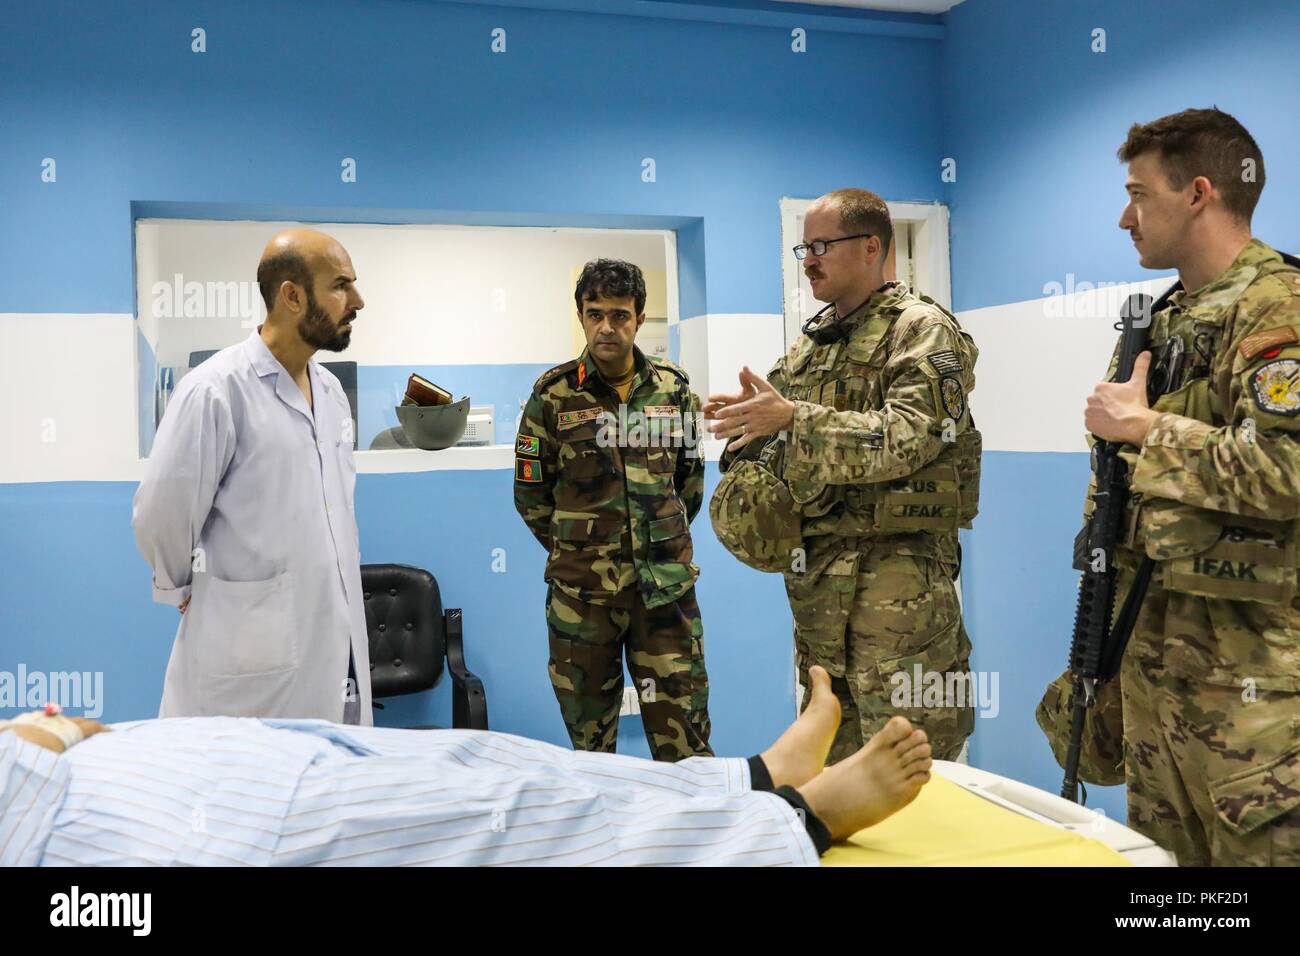 KANDAHAR PROVINCE, Afghanistan (August 5, 2018) -- U.S. Navy Lt. Cdr. Justin S. Clark, radiology technician for Kandahar Airfield NATO Role III Multinational Medical Unit, talks to Afghan radiology technicians, August 5, 2018, during a medical advisory visit at Kandahar Regional Military Hospital, Camp Hero in Kandahar, Afghanistan. Staff members from the Role III conduct routine visits to KRMH to train and advice Afghan medical staff. Stock Photo